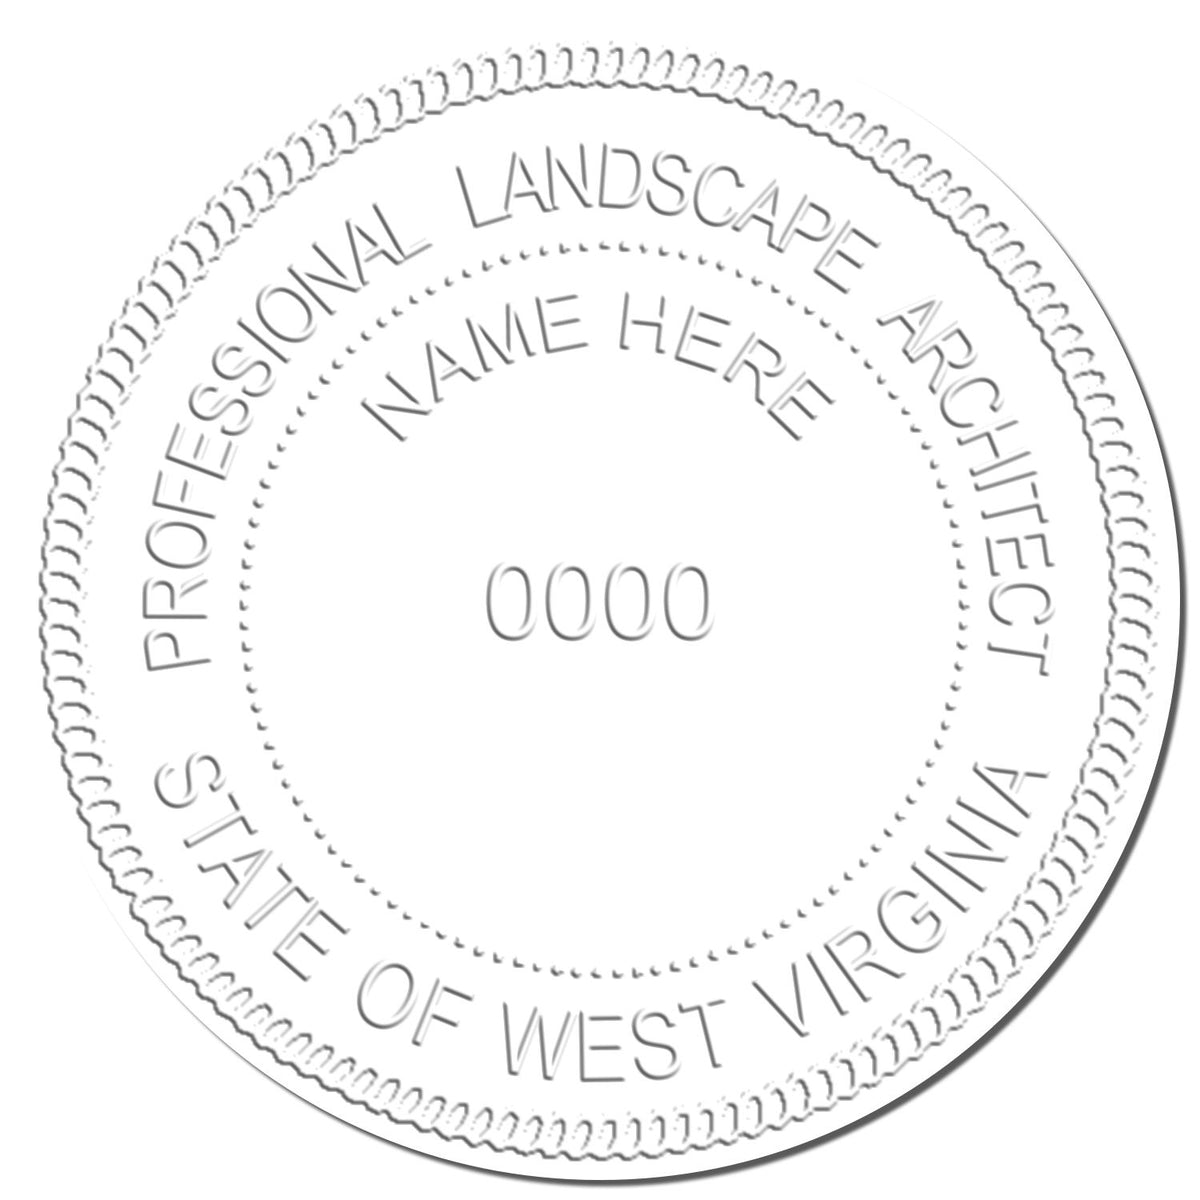 This paper is stamped with a sample imprint of the Soft Pocket West Virginia Landscape Architect Embosser, signifying its quality and reliability.